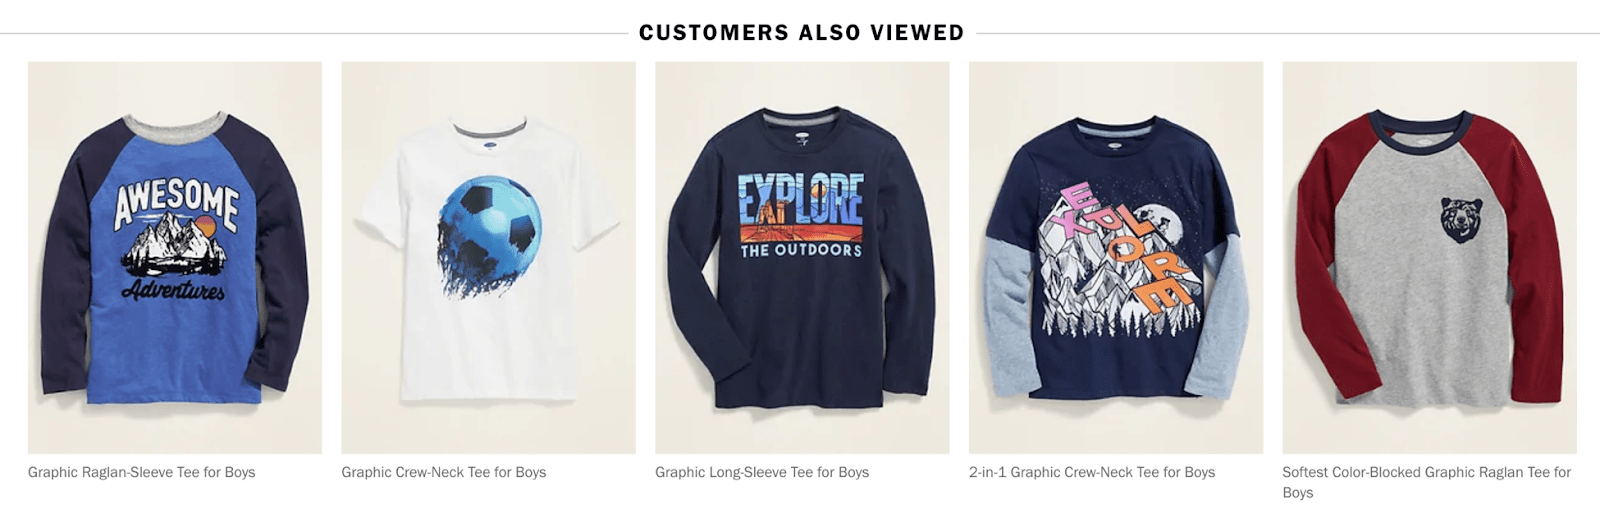 Screenshot of Old Navy's cart recommendations